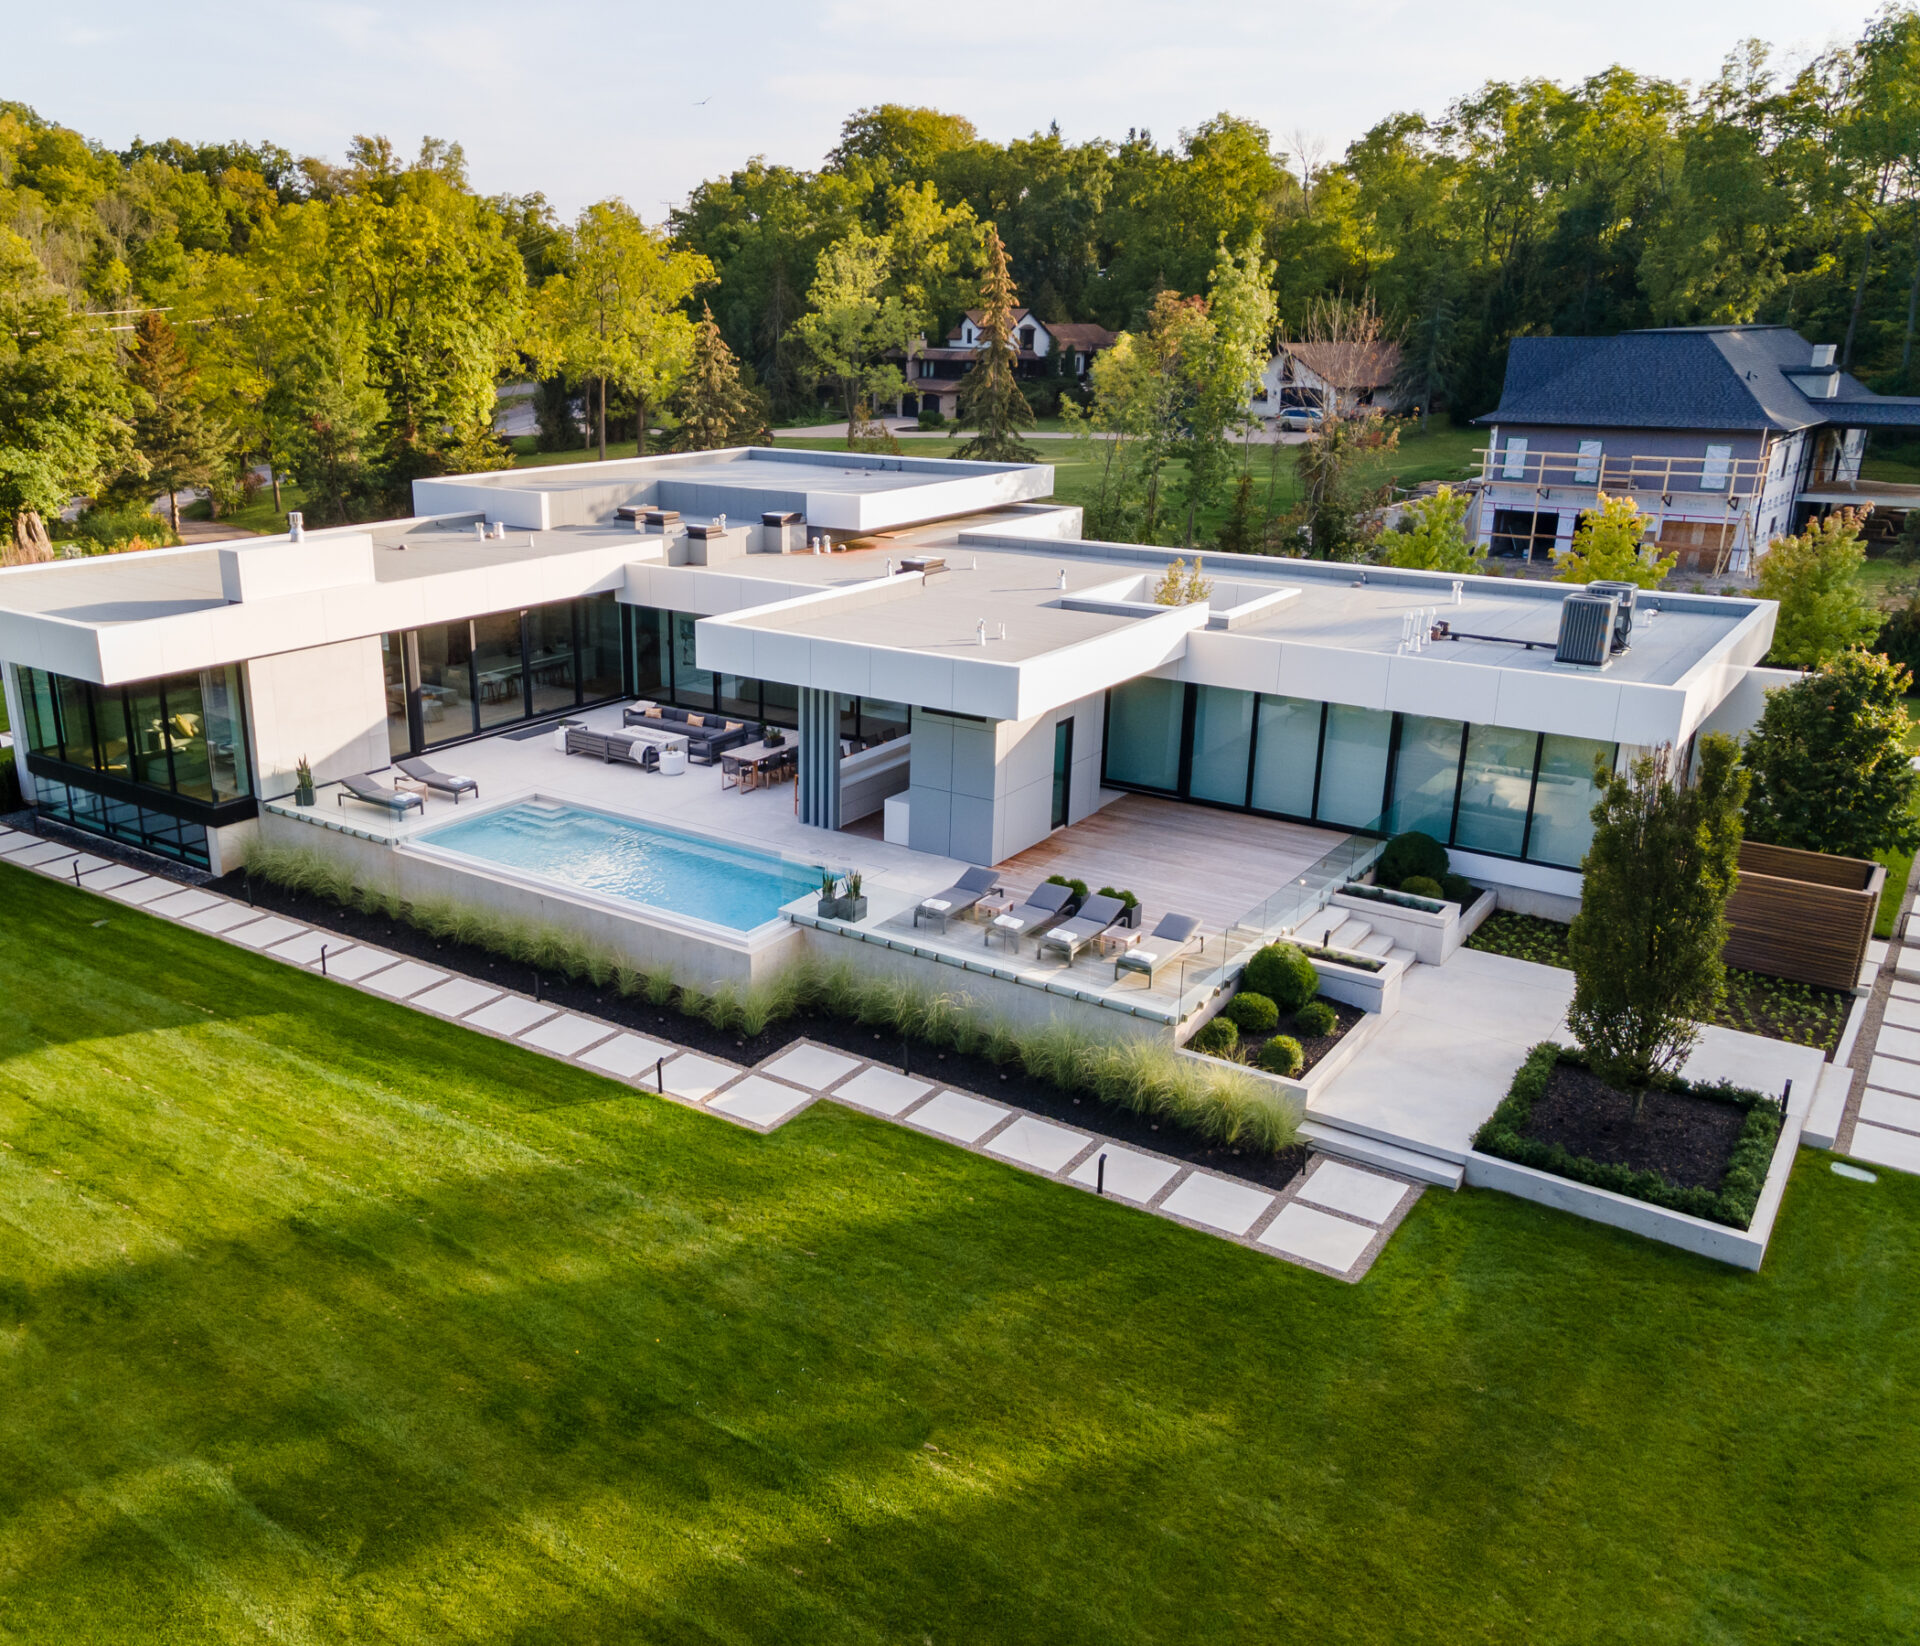 Aerial view of a modern, luxurious house with flat roofs, expansive windows, a swimming pool, outdoor lounging areas, and meticulously landscaped grounds.